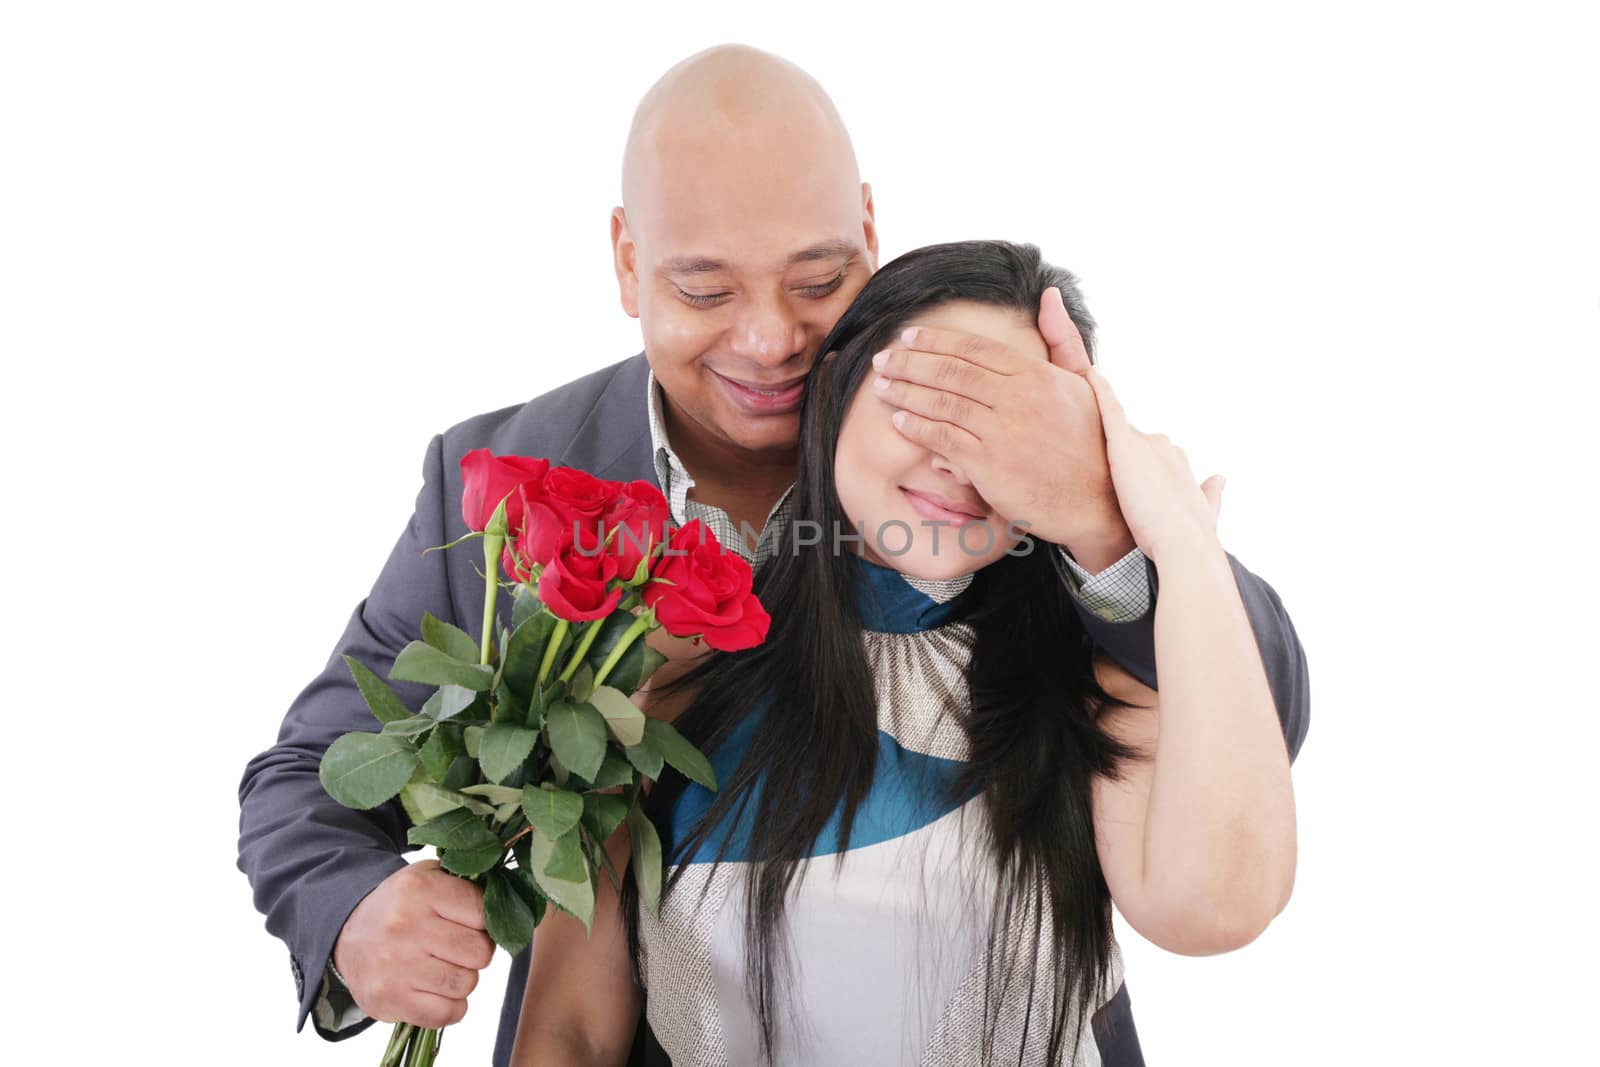 Man offering a bouquet of red roses to a woman